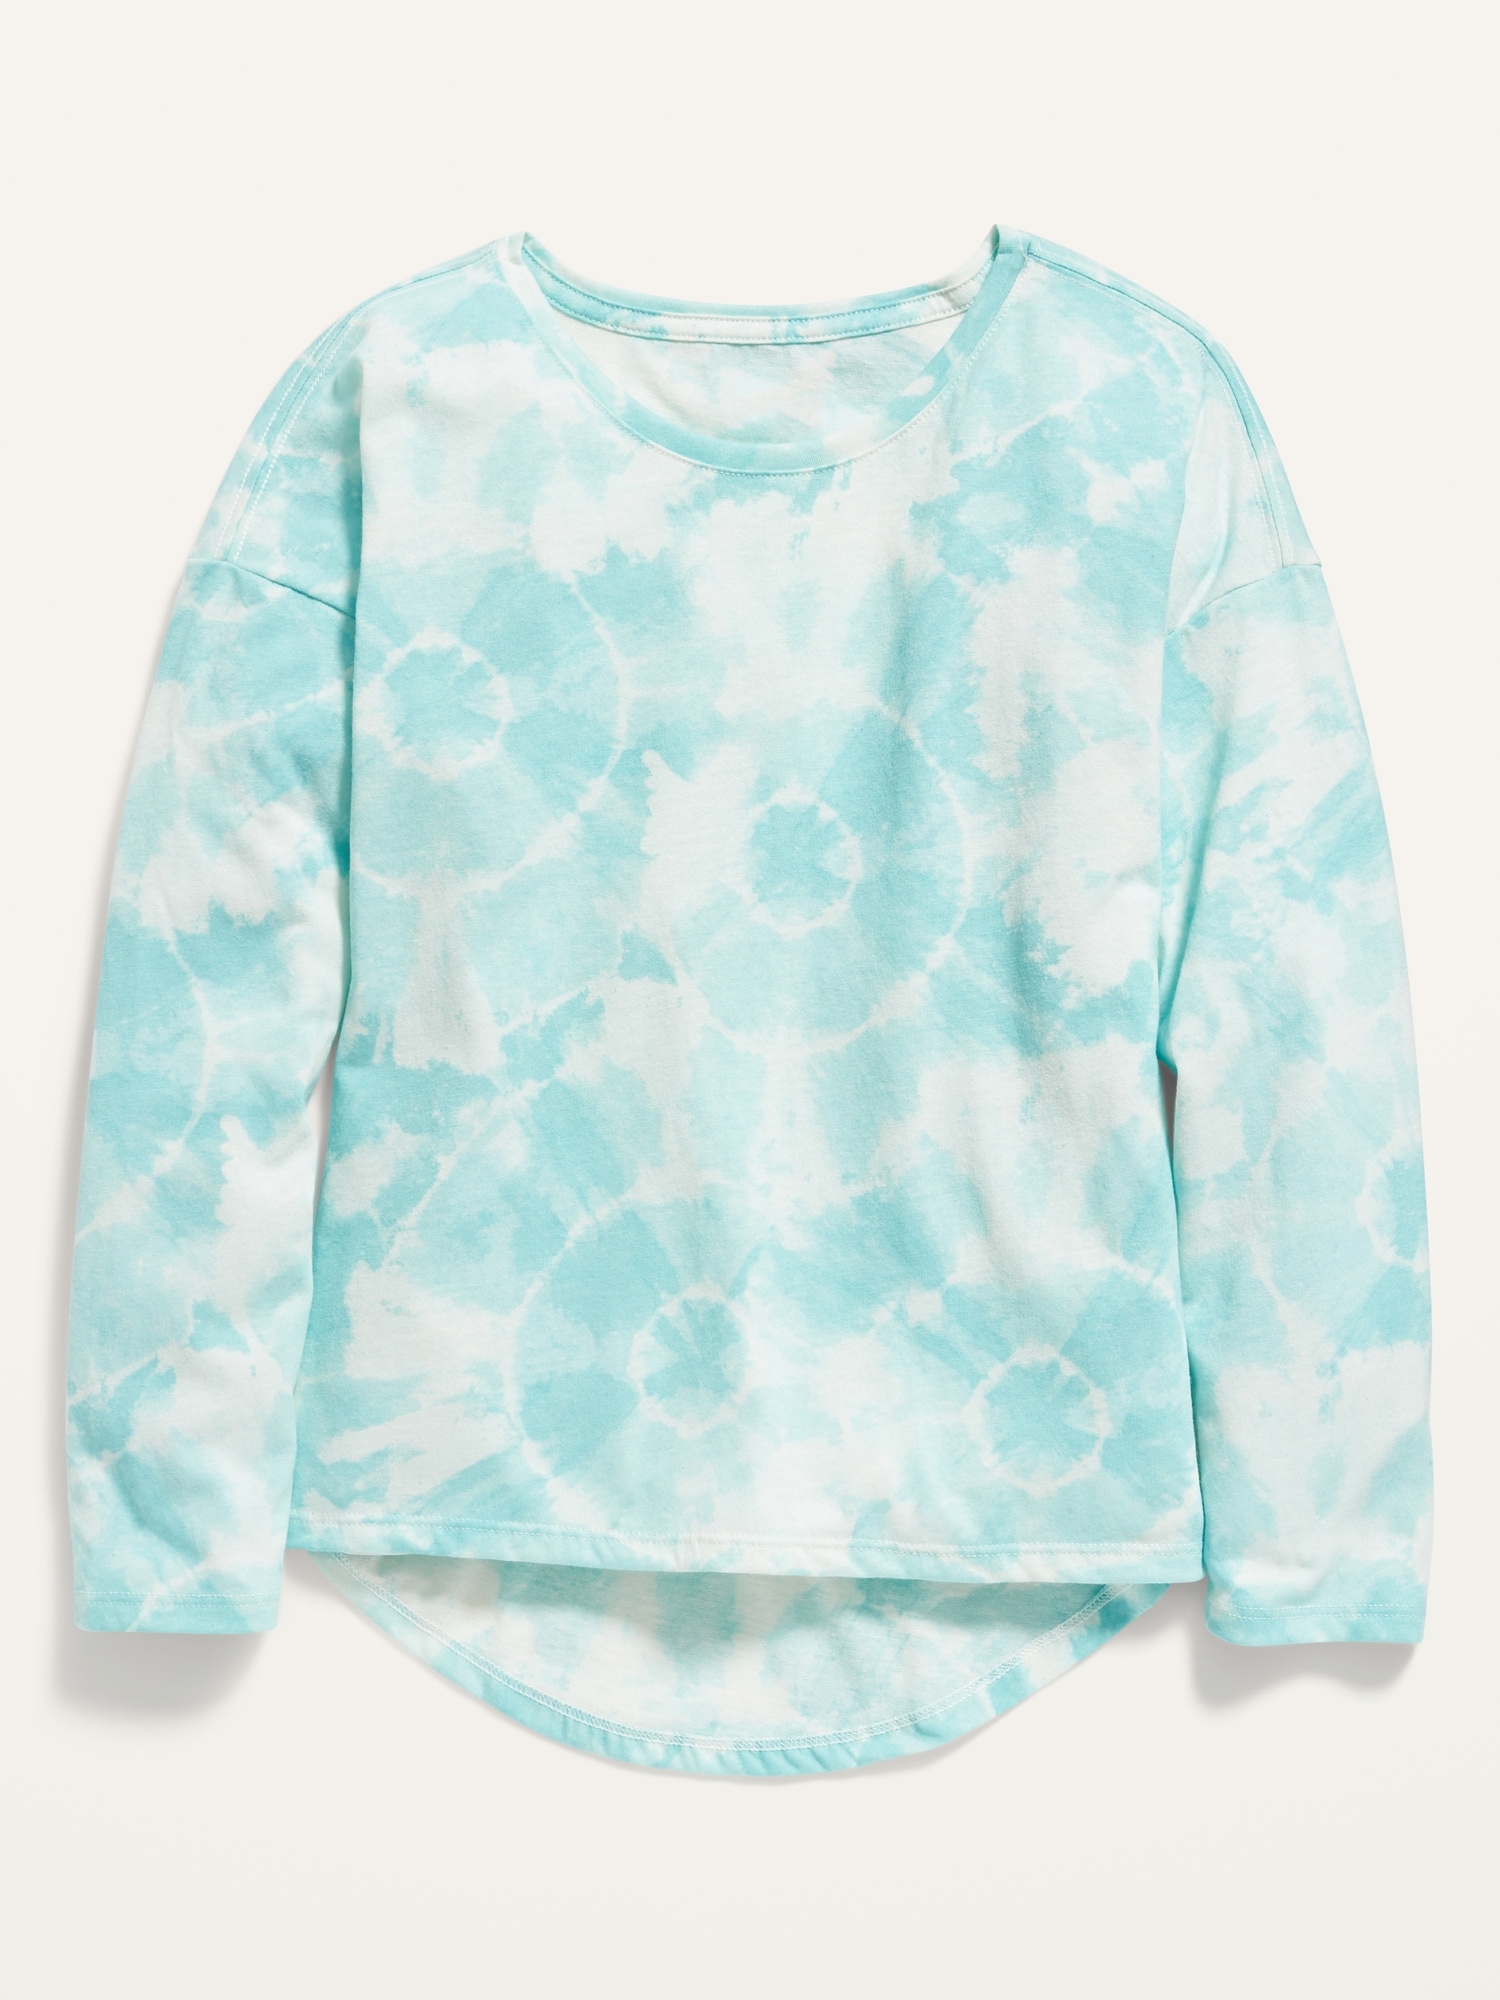 Softest Long-Sleeve Tie-Dye Tee for Girls | Old Navy